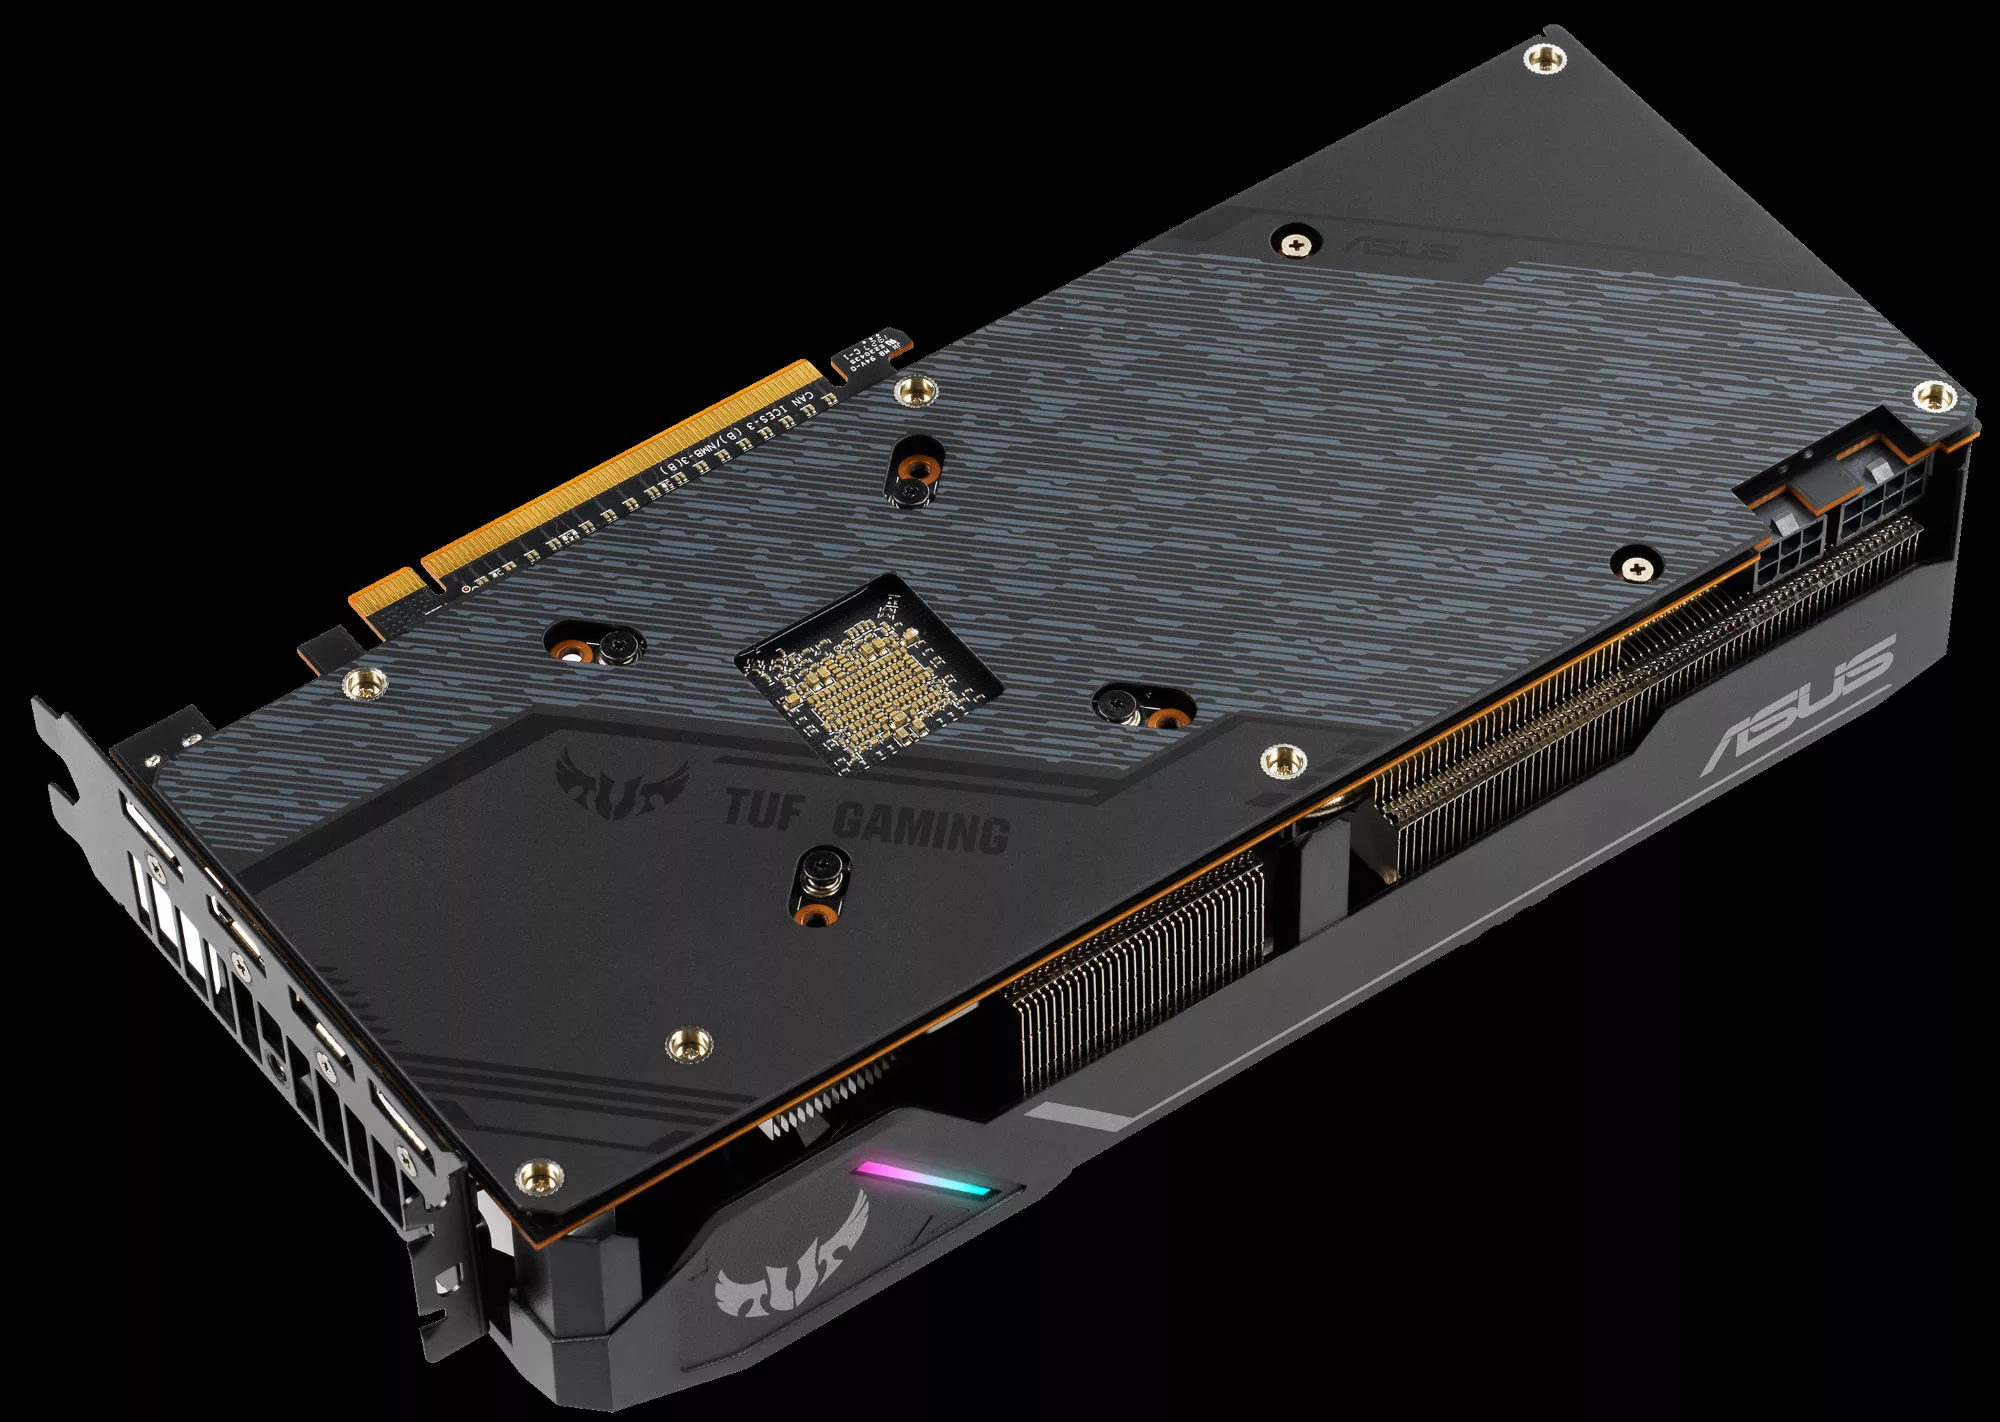 Radeon RX 5700-series graphics cards from ROG and ASUS let Navi 